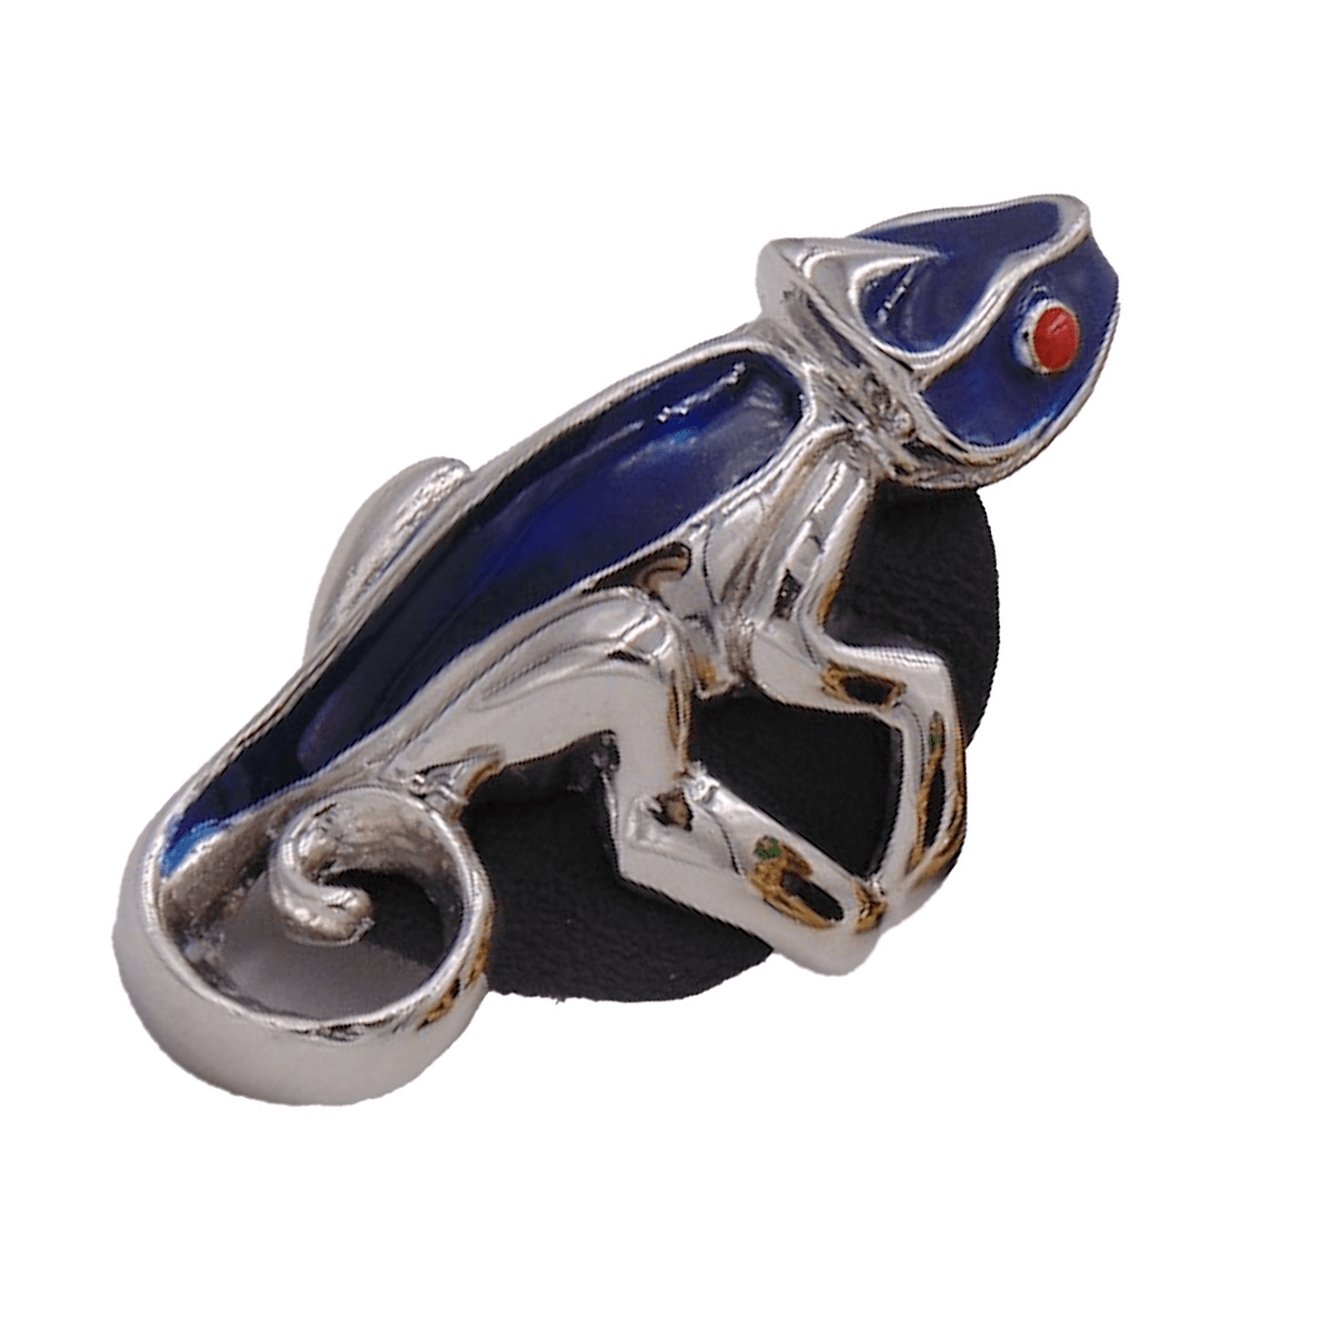 24k Gold Plated Bronze ring in the shape of a Chameleon. The ring has red eyes with navy blue enamel details. The ring is displayed on black stand on white background